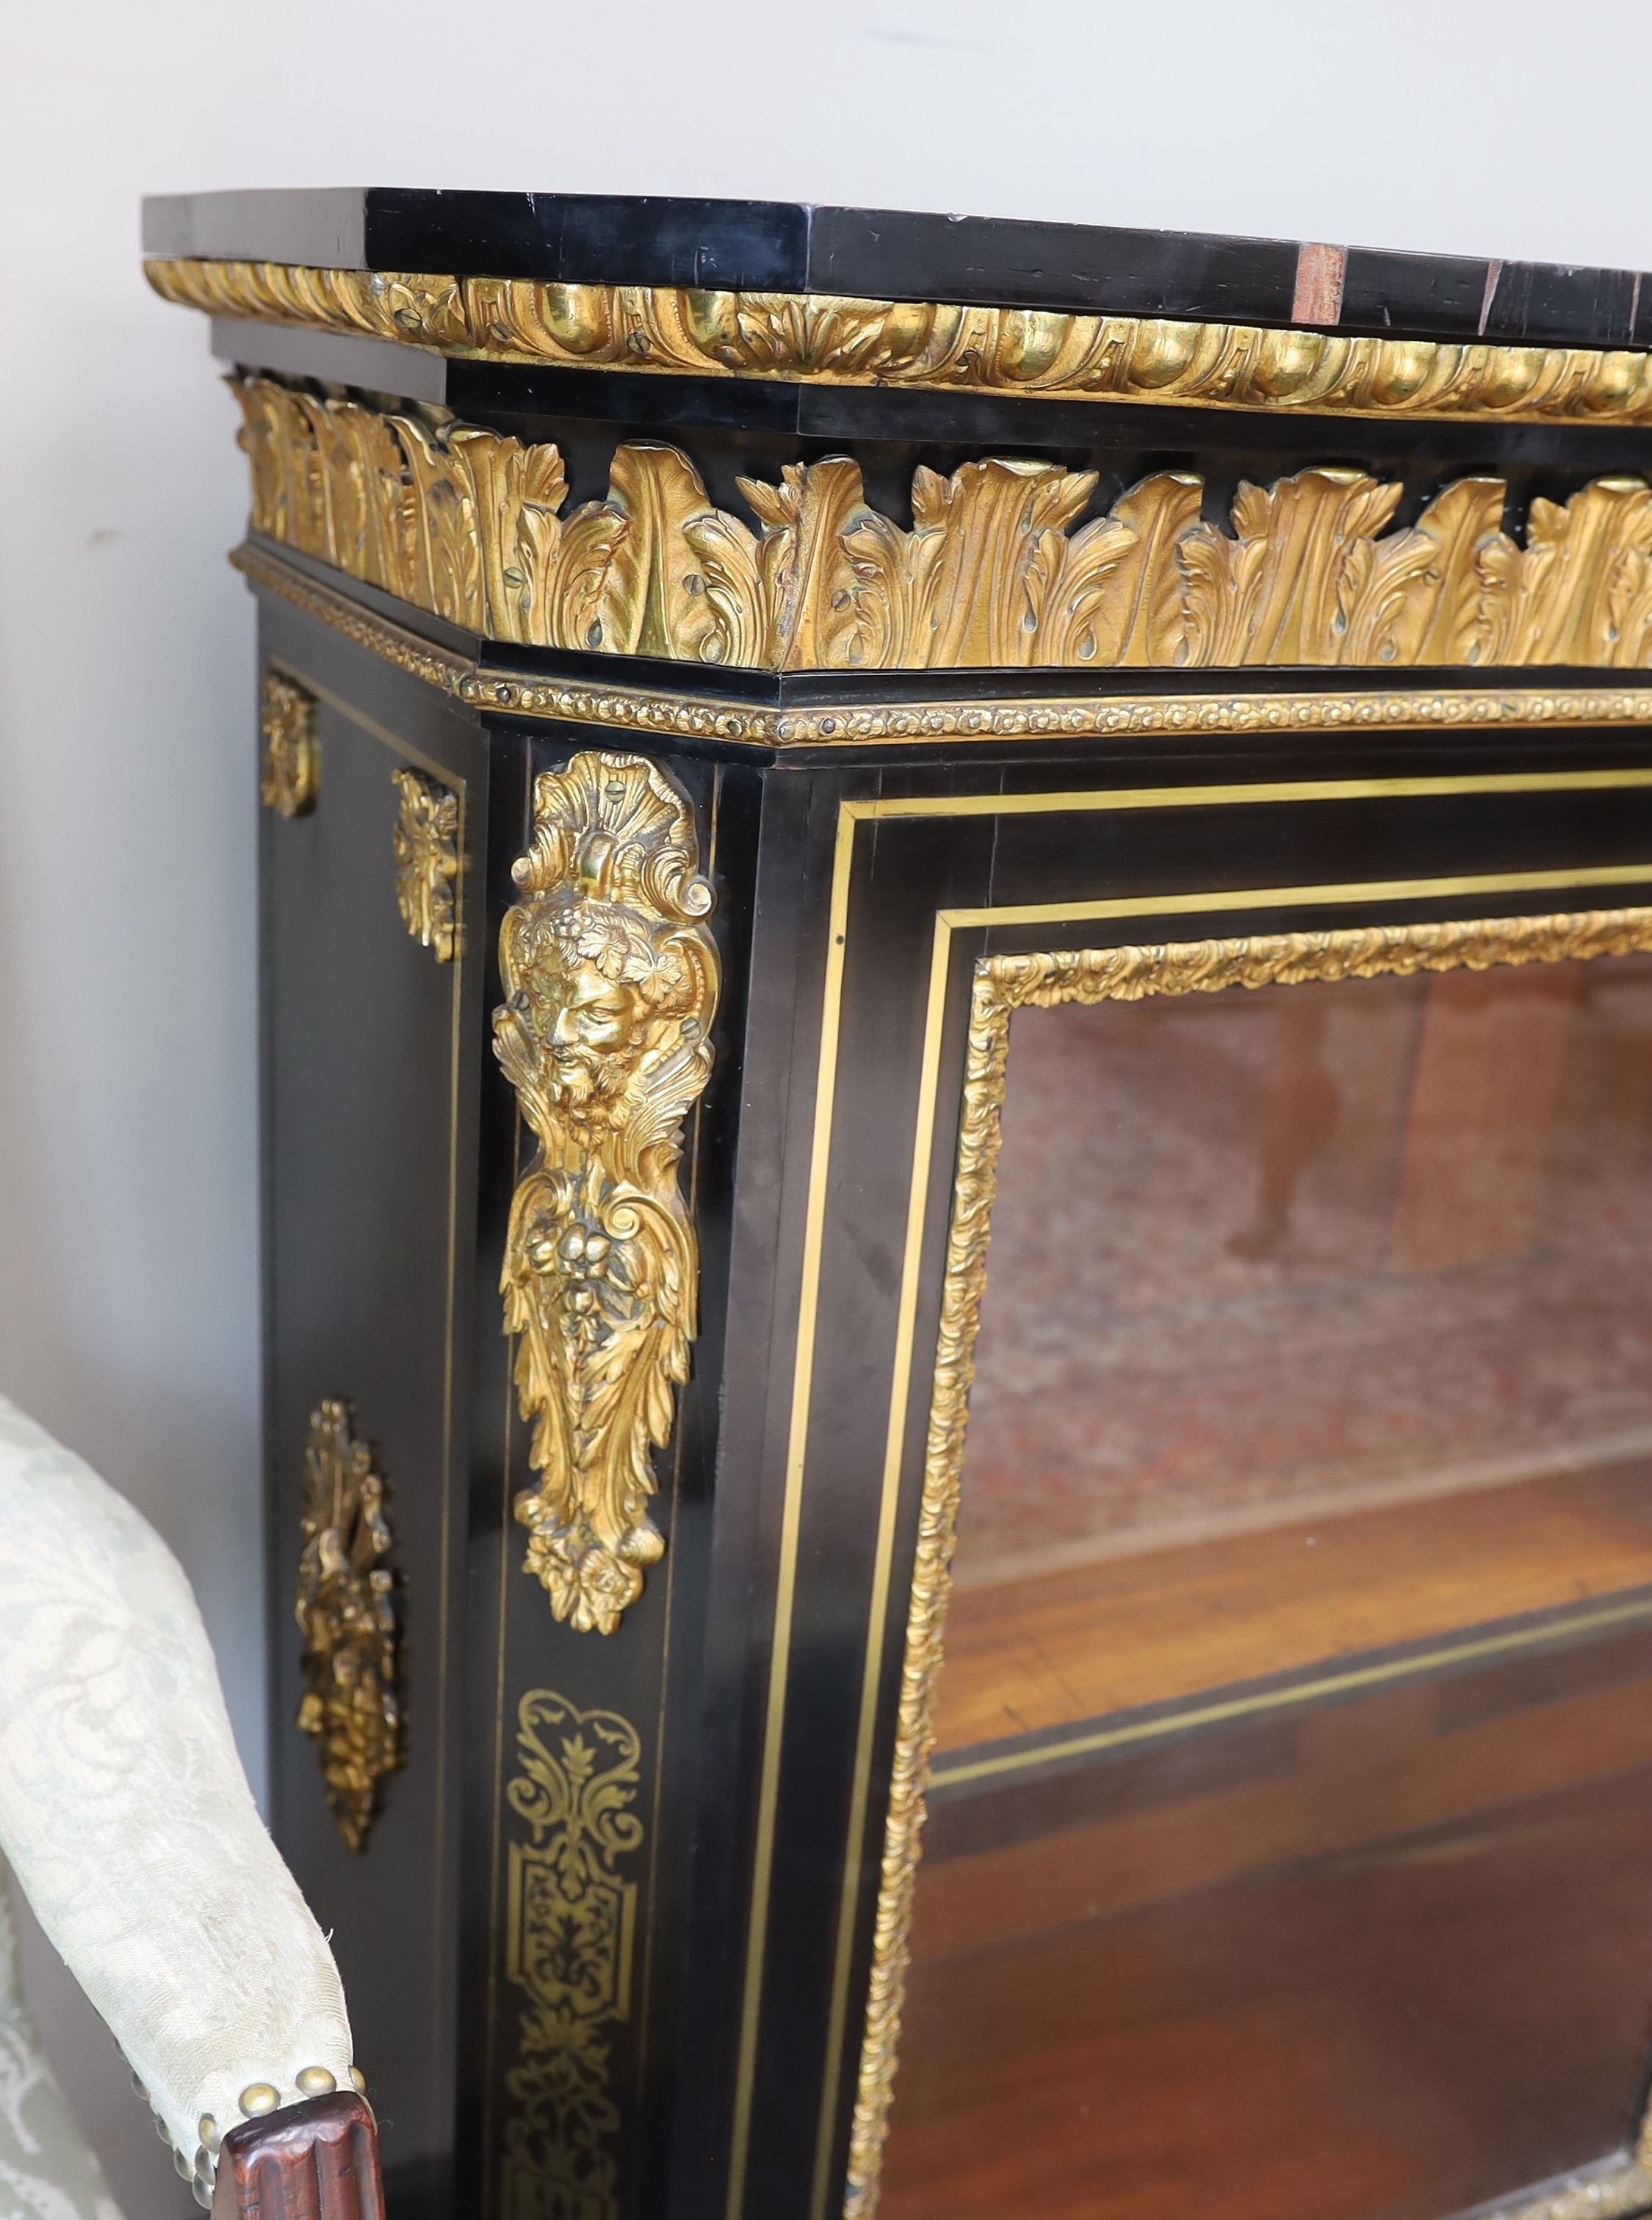 A 19th century French gilt metal mounted ebonised two door side cabinet, width 140cm, depth 38cm, height 107cm